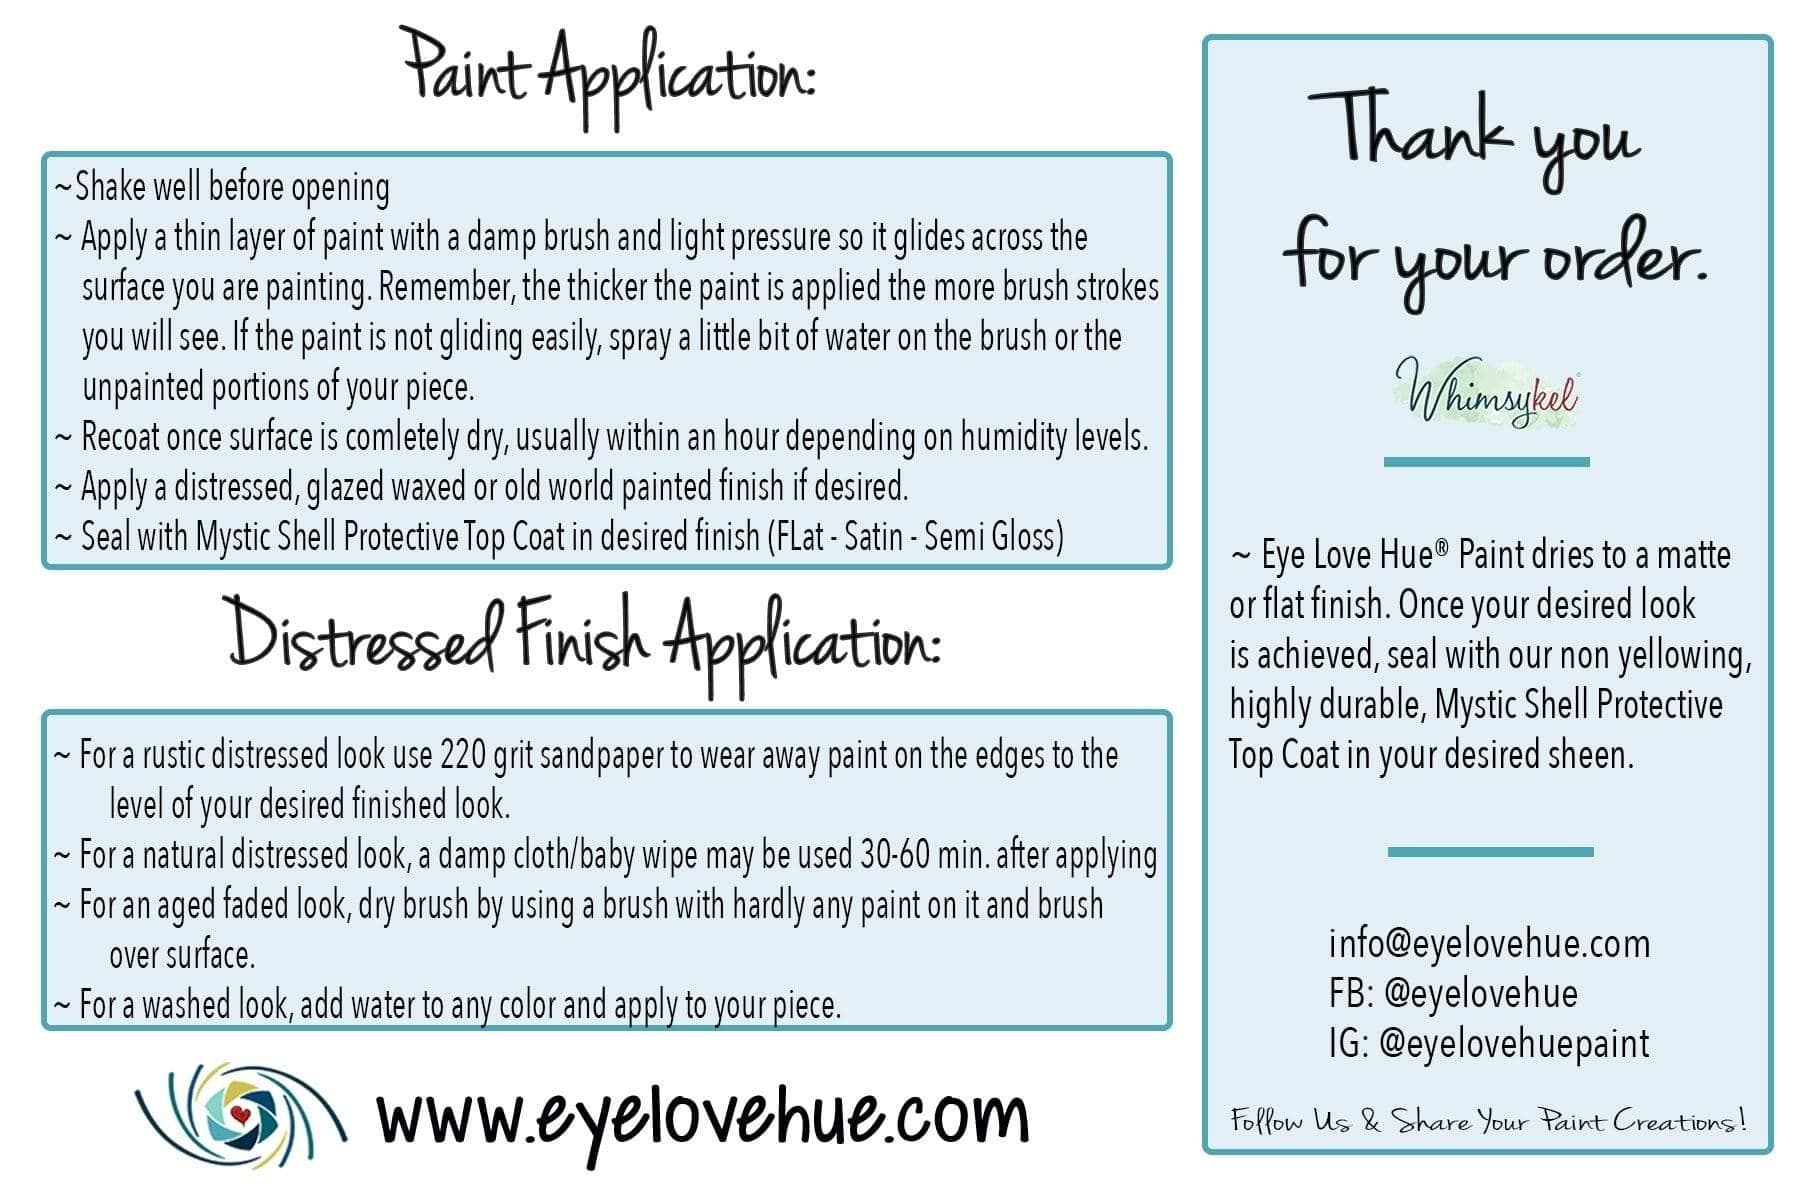 Whimsykel Lime - Eye Love Hue Paint & Products